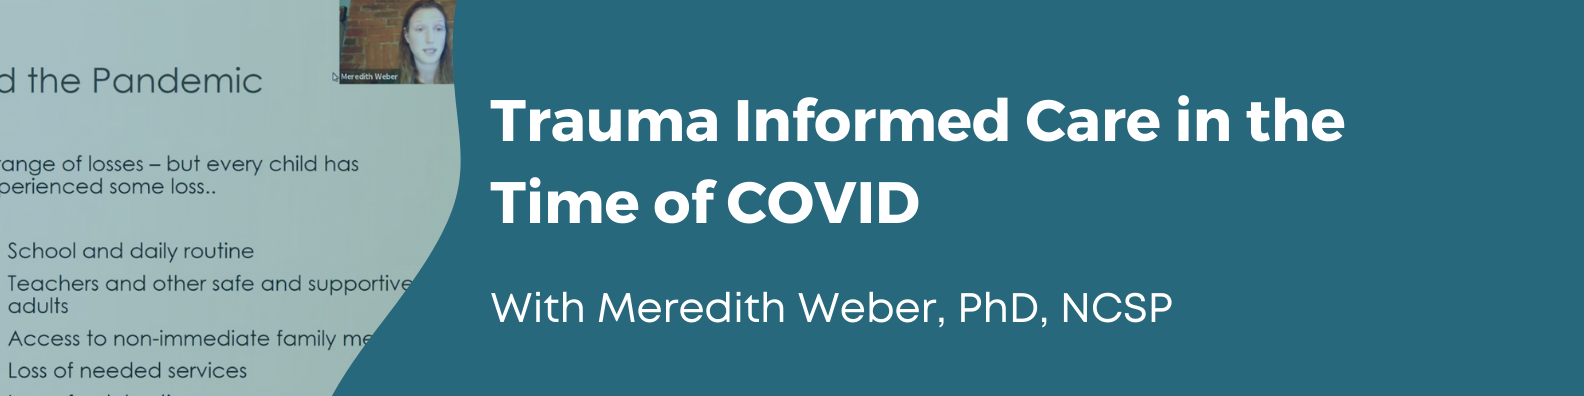 Trauma Informed Care in the Time of COVID with Meredith Weber, PhD, NCSP